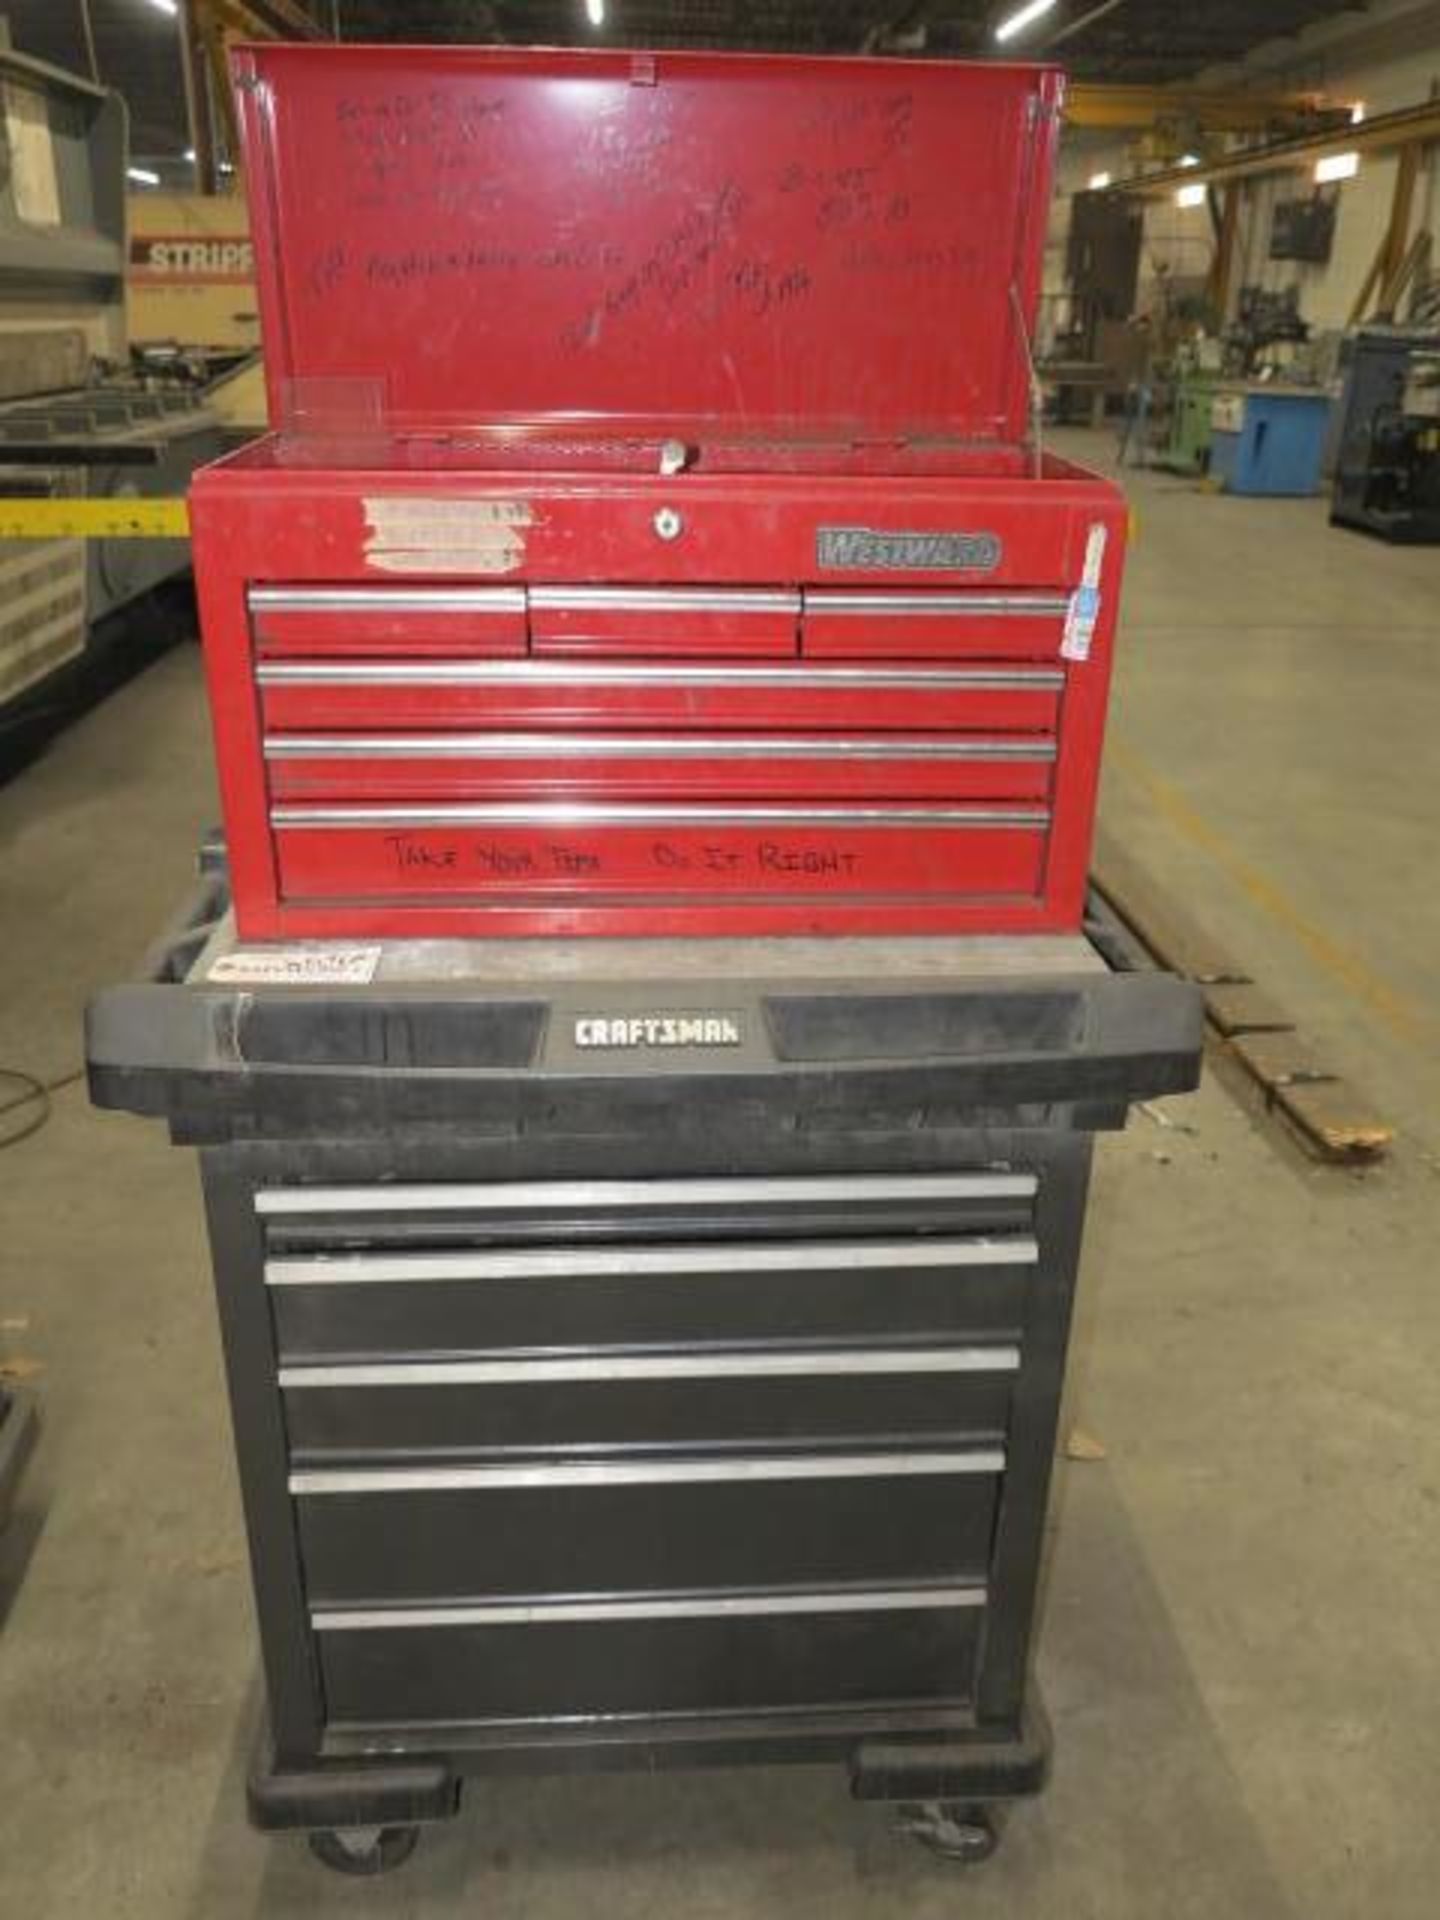 Craftsman Tool Chest and Westward Tool Box